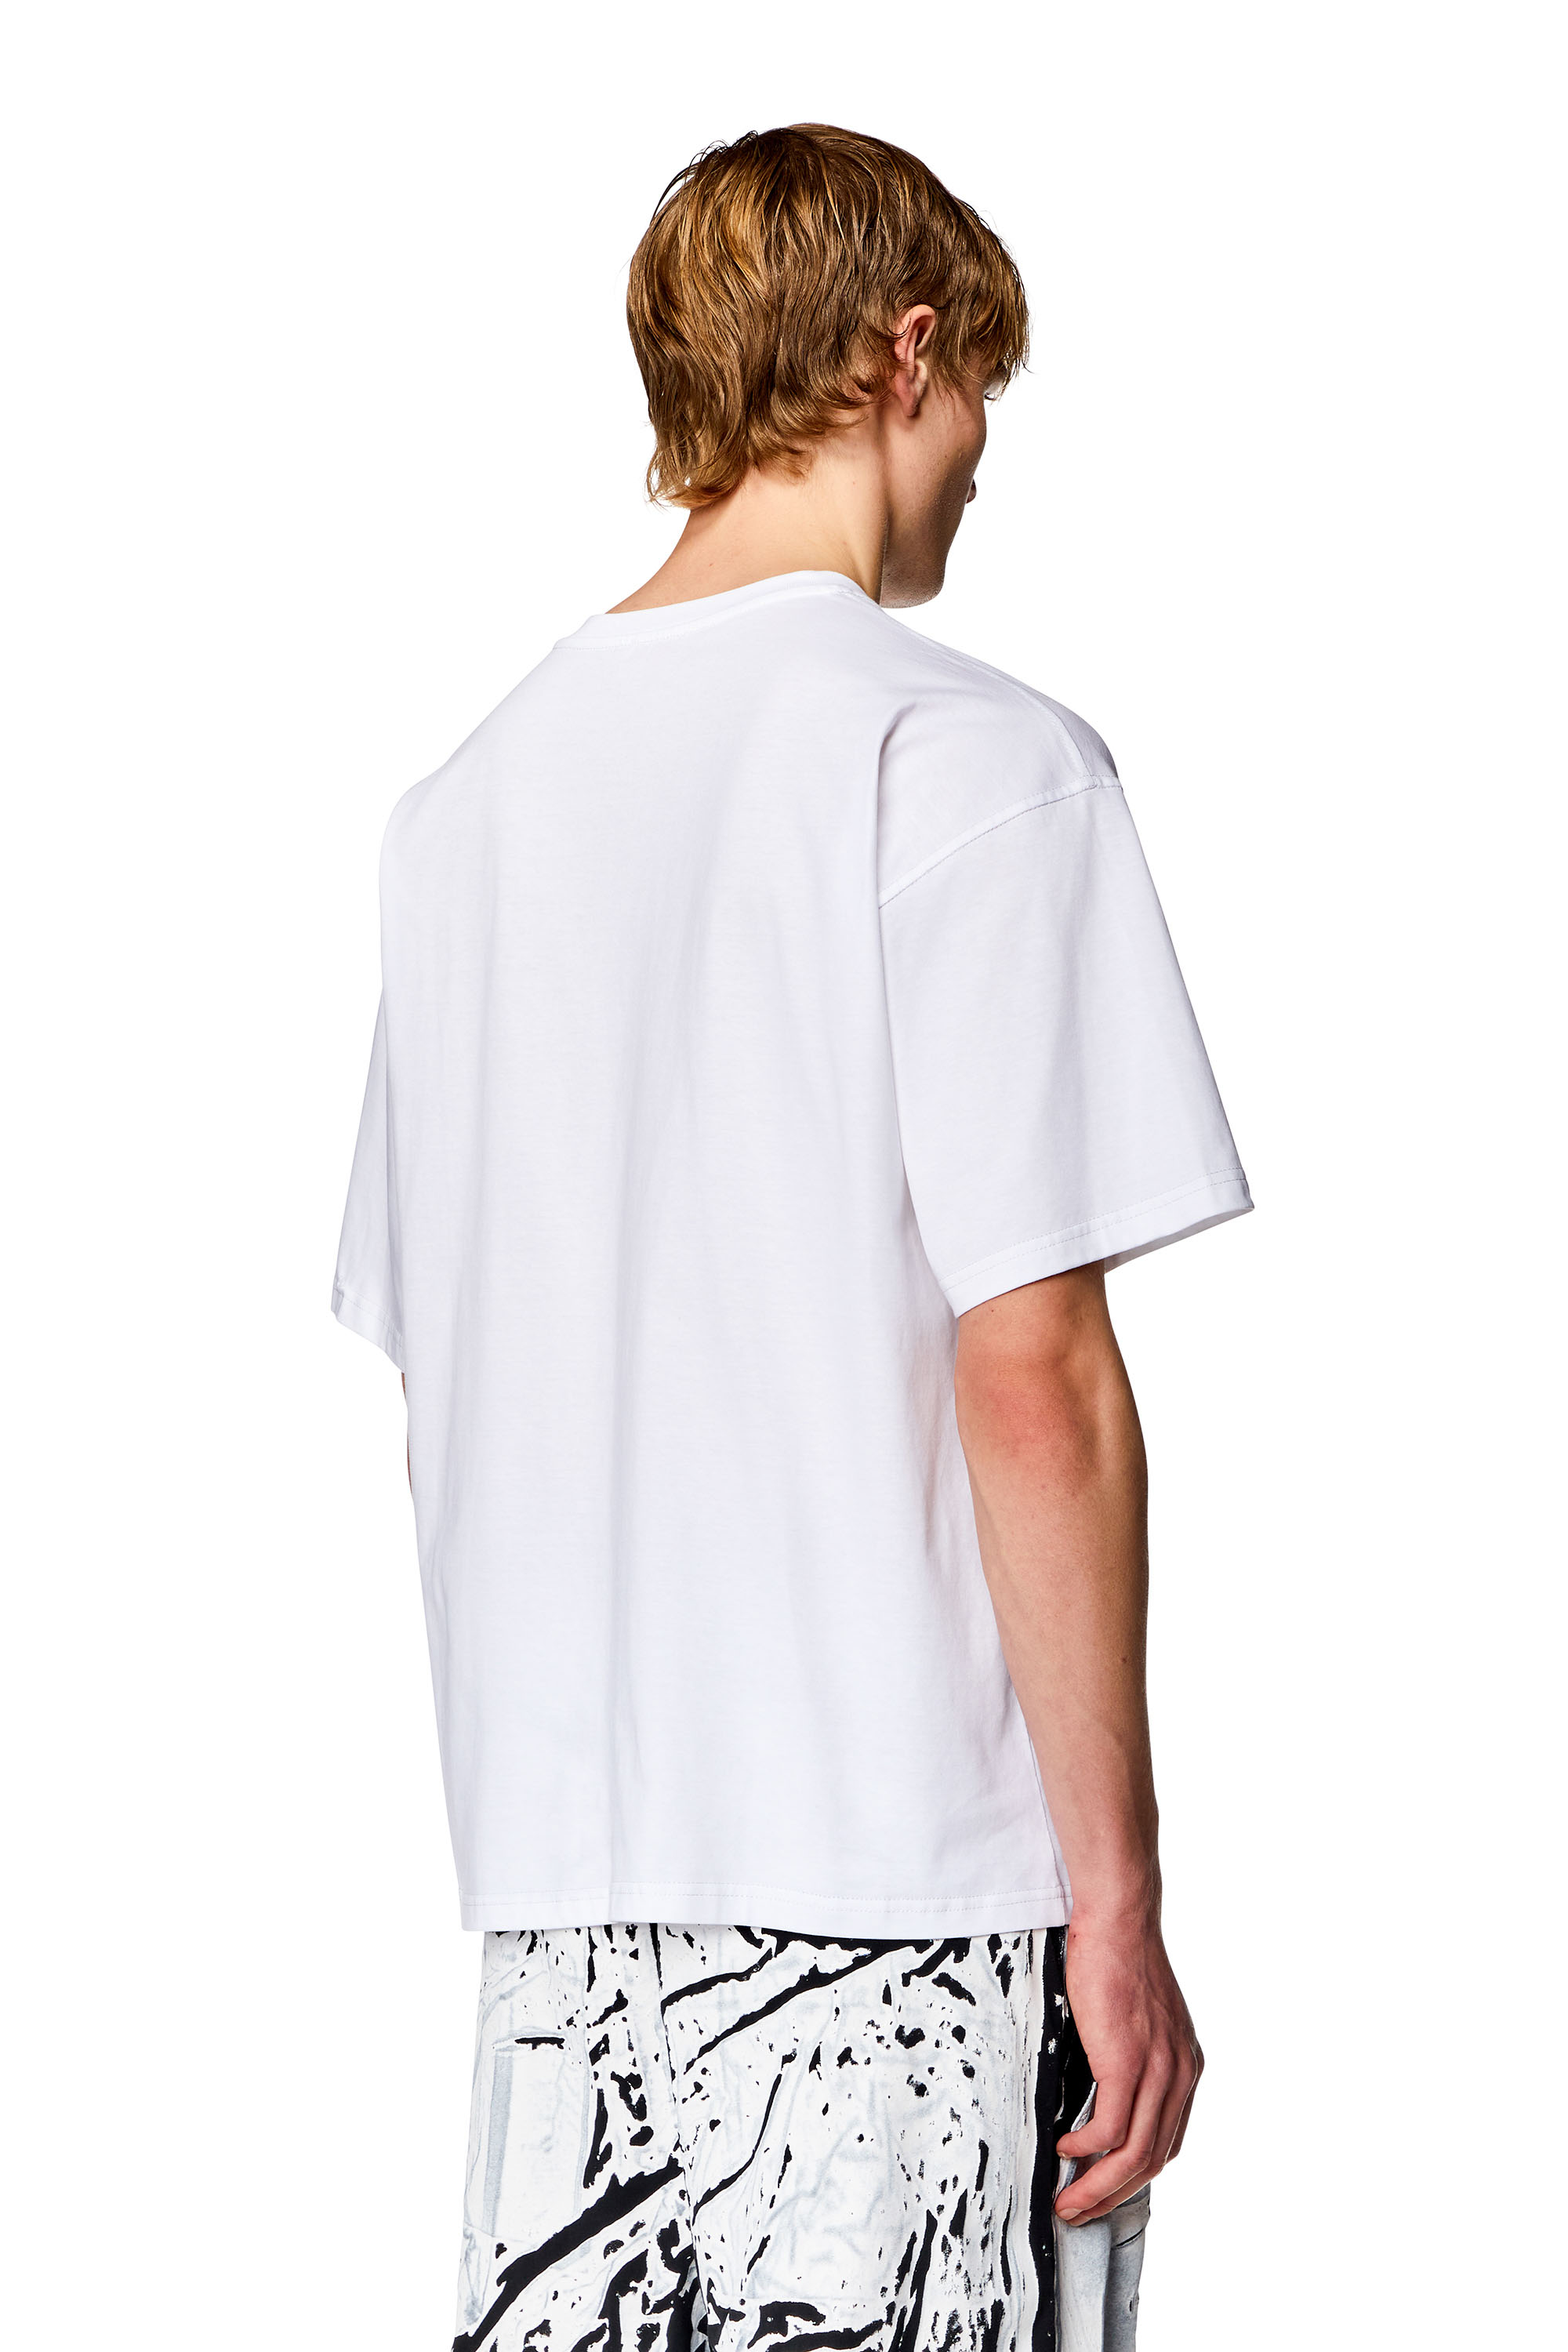 Diesel - T-BOXT, Man T-shirt with layered logos in White - Image 2